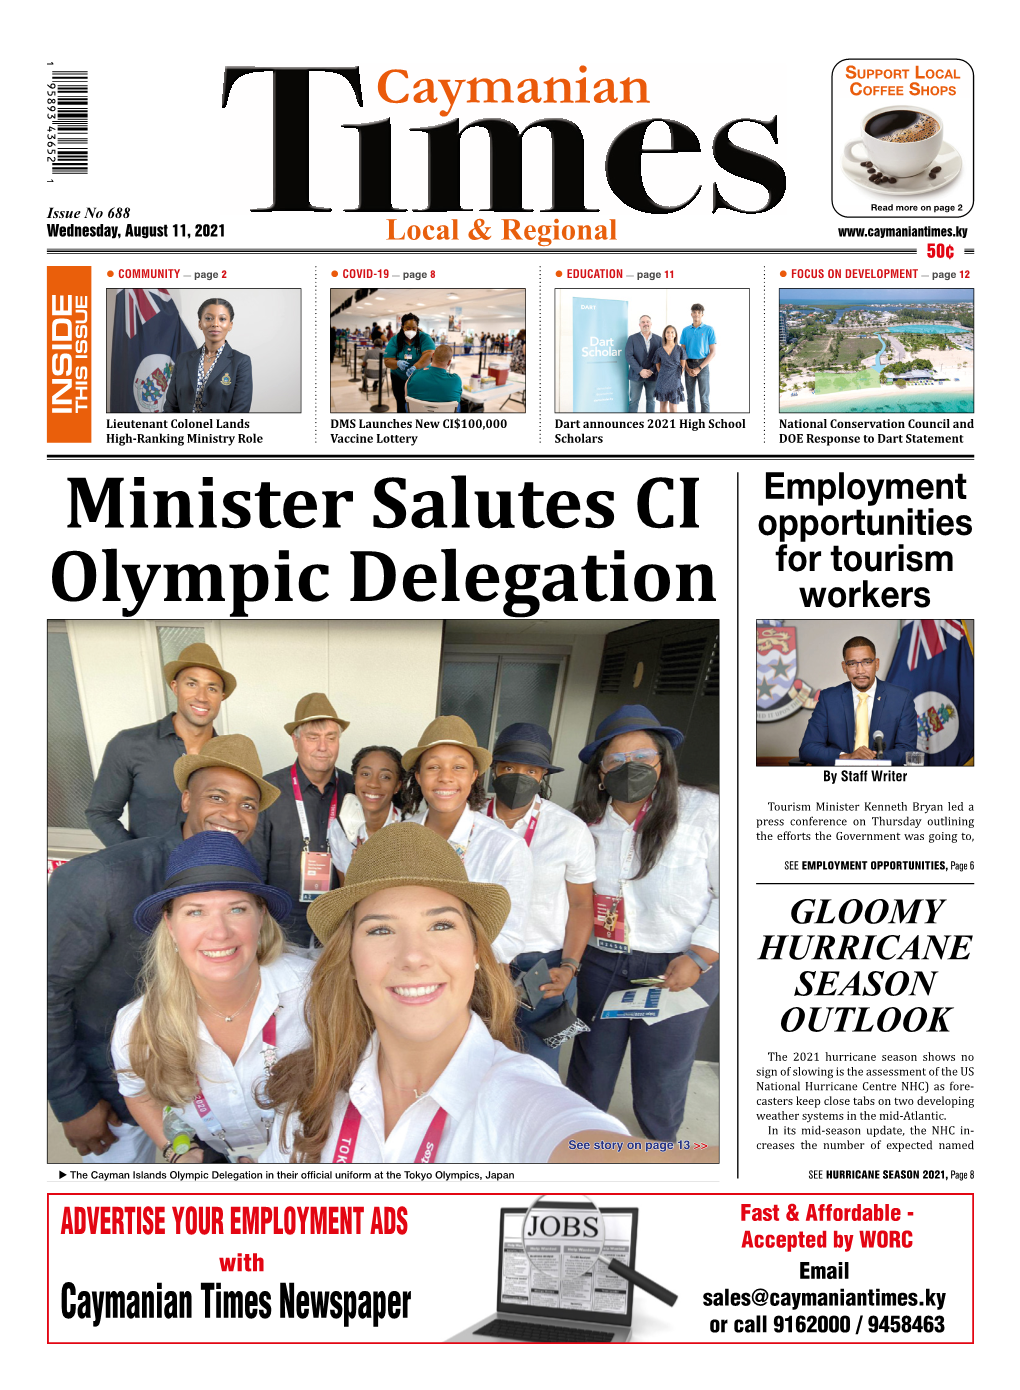 Caymanian Times Newspaper Or Call 9162000 / 9458463 2 Issue No 688 | Wednesday, August 11, 2021 | Caymanian Times Co��Ee Shop / Community